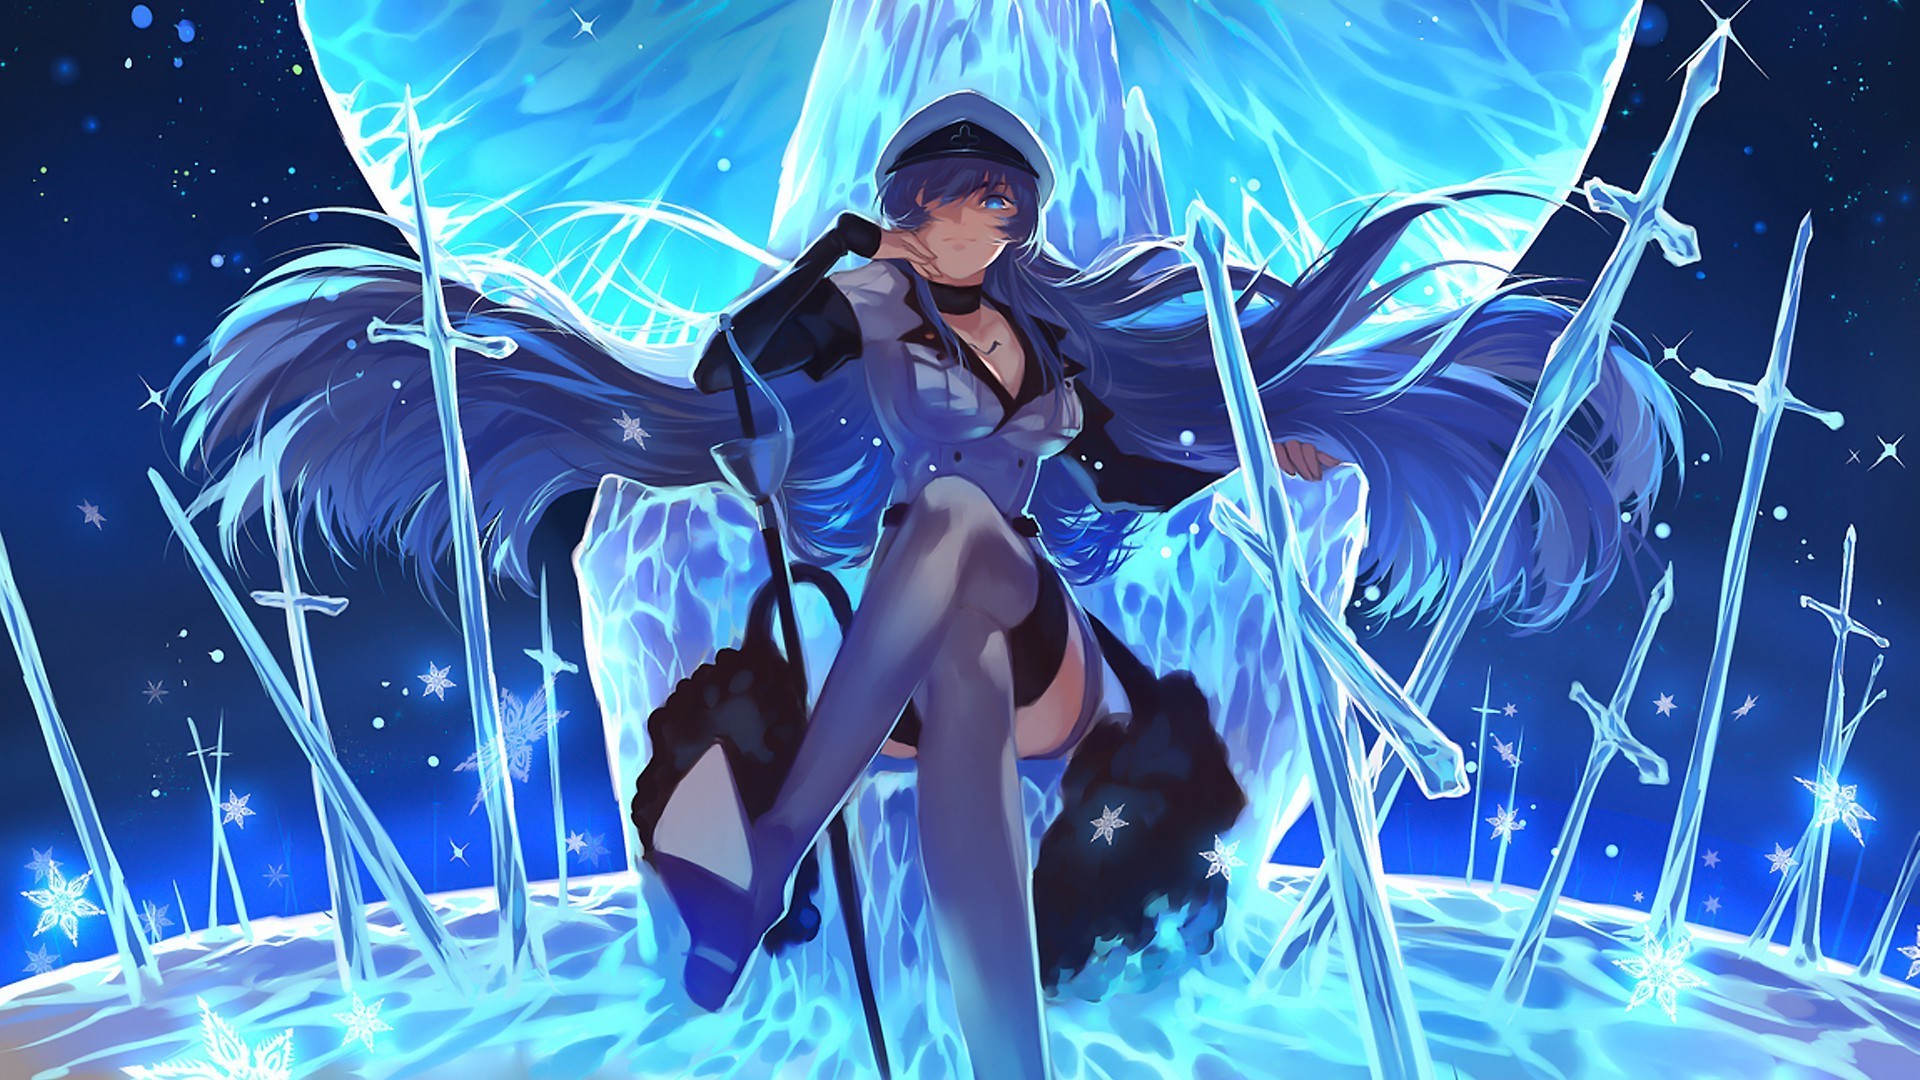 Esdeath Wallpaper Pictures